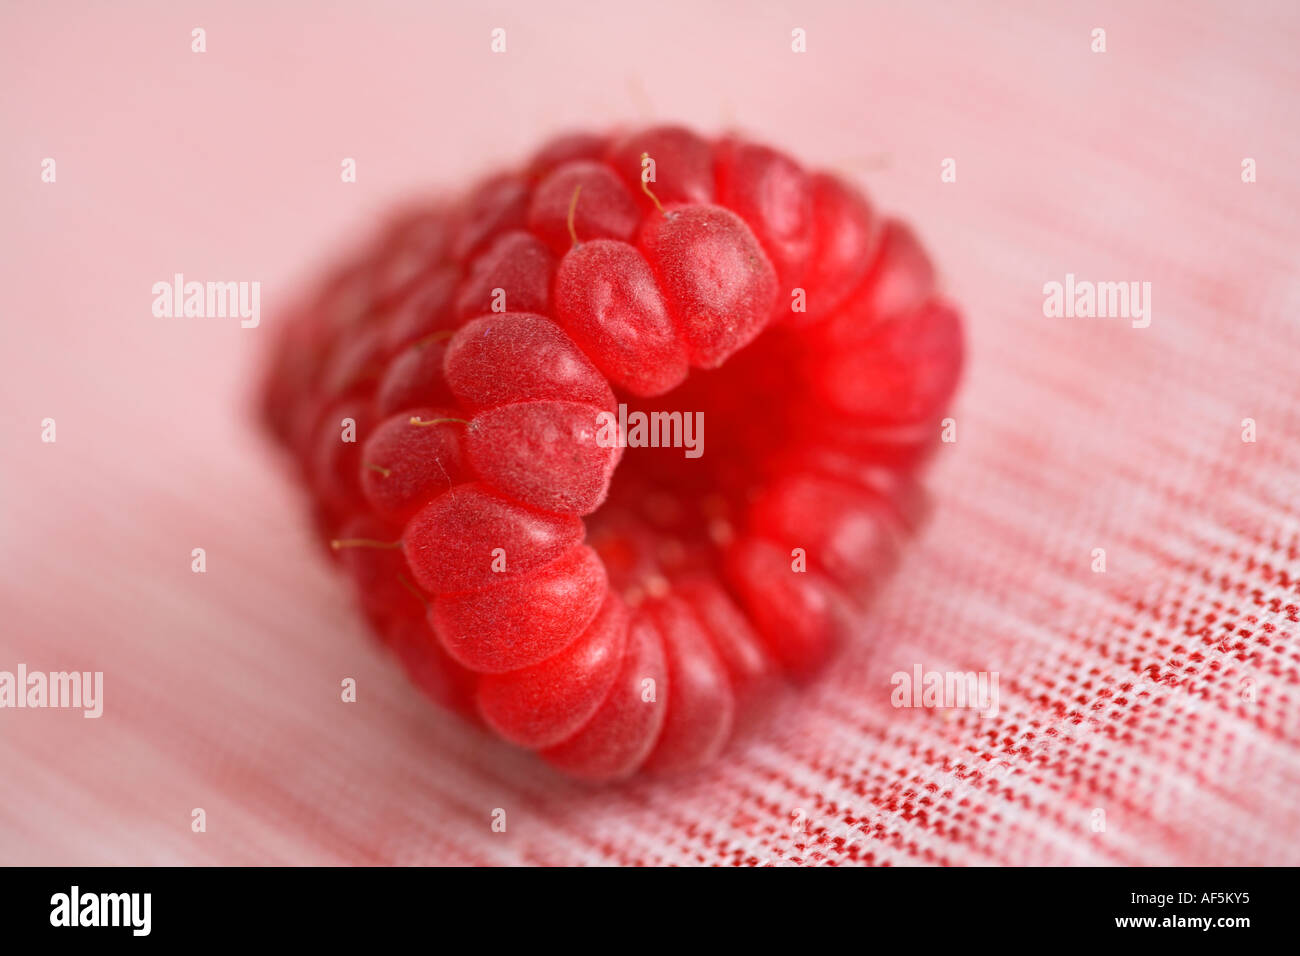 Red Raspberry Close up Banque D'Images